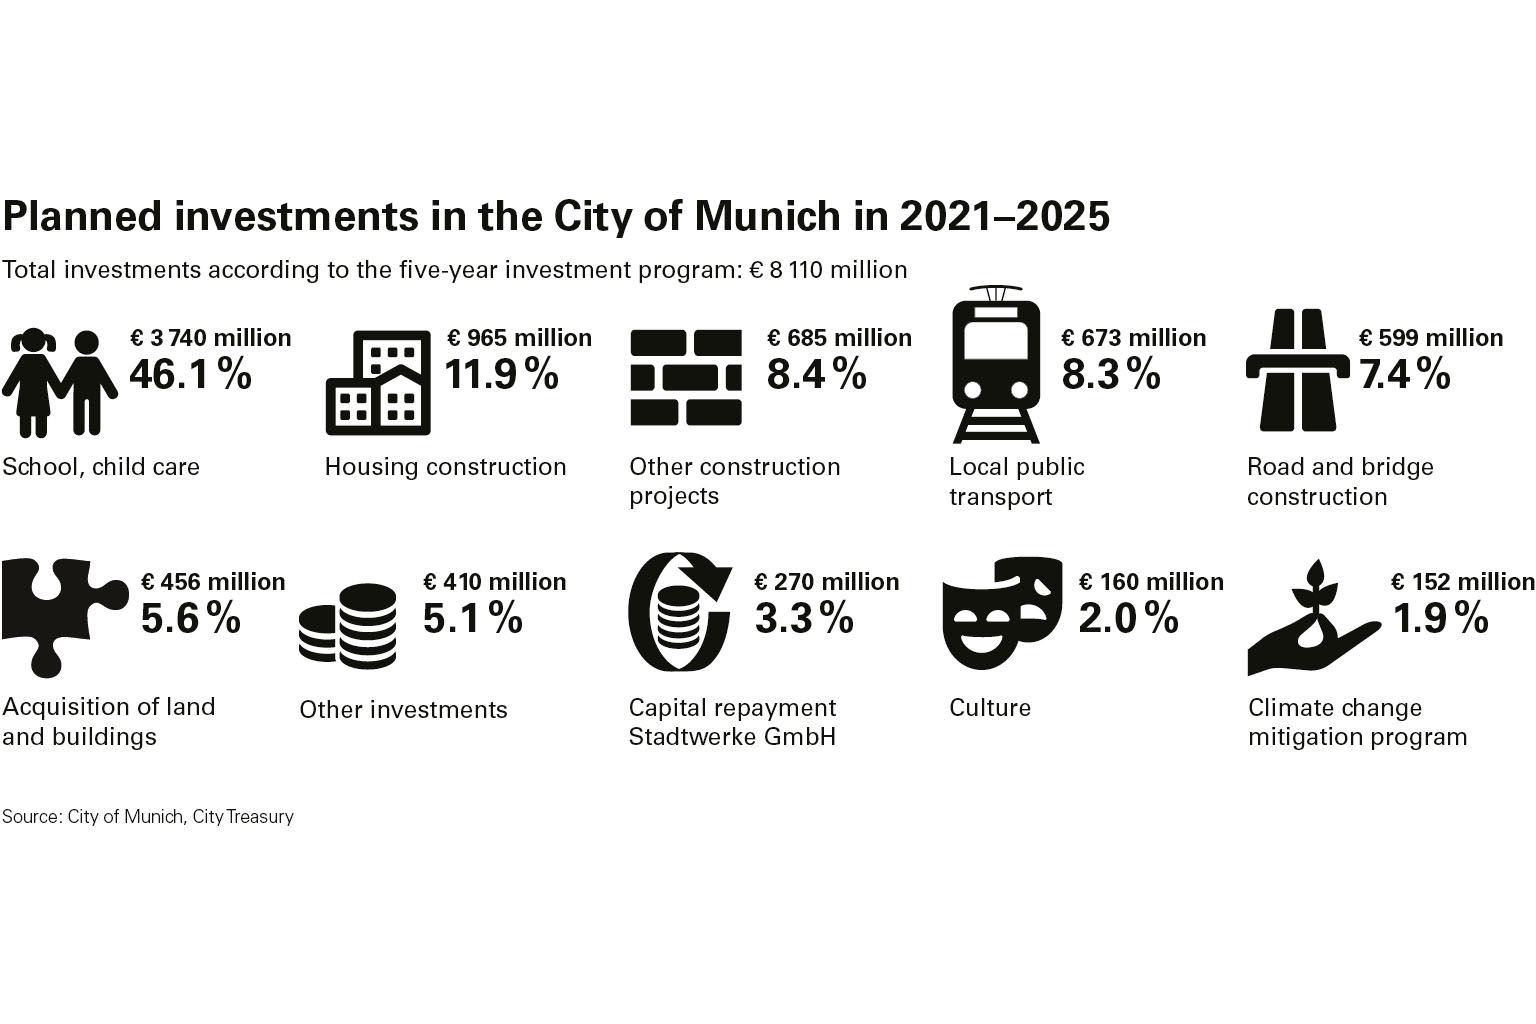 chart on planned investments in the City of Munich 2021 - 2025